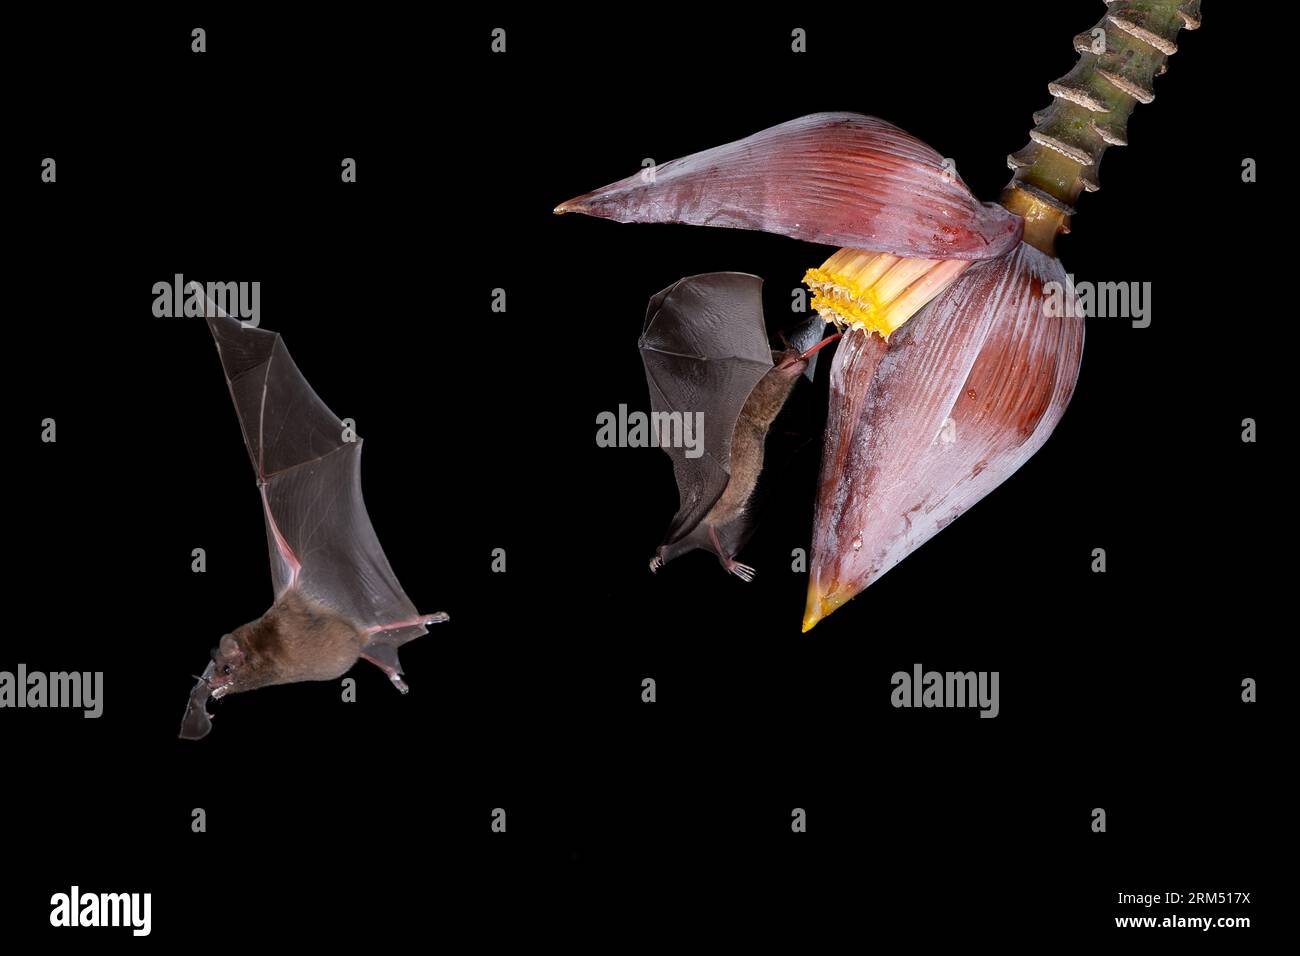 Nature's nocturnal pollinators, Leaf-nosed Bats sipping nectar from a banana flower in Costa Rica Stock Photo